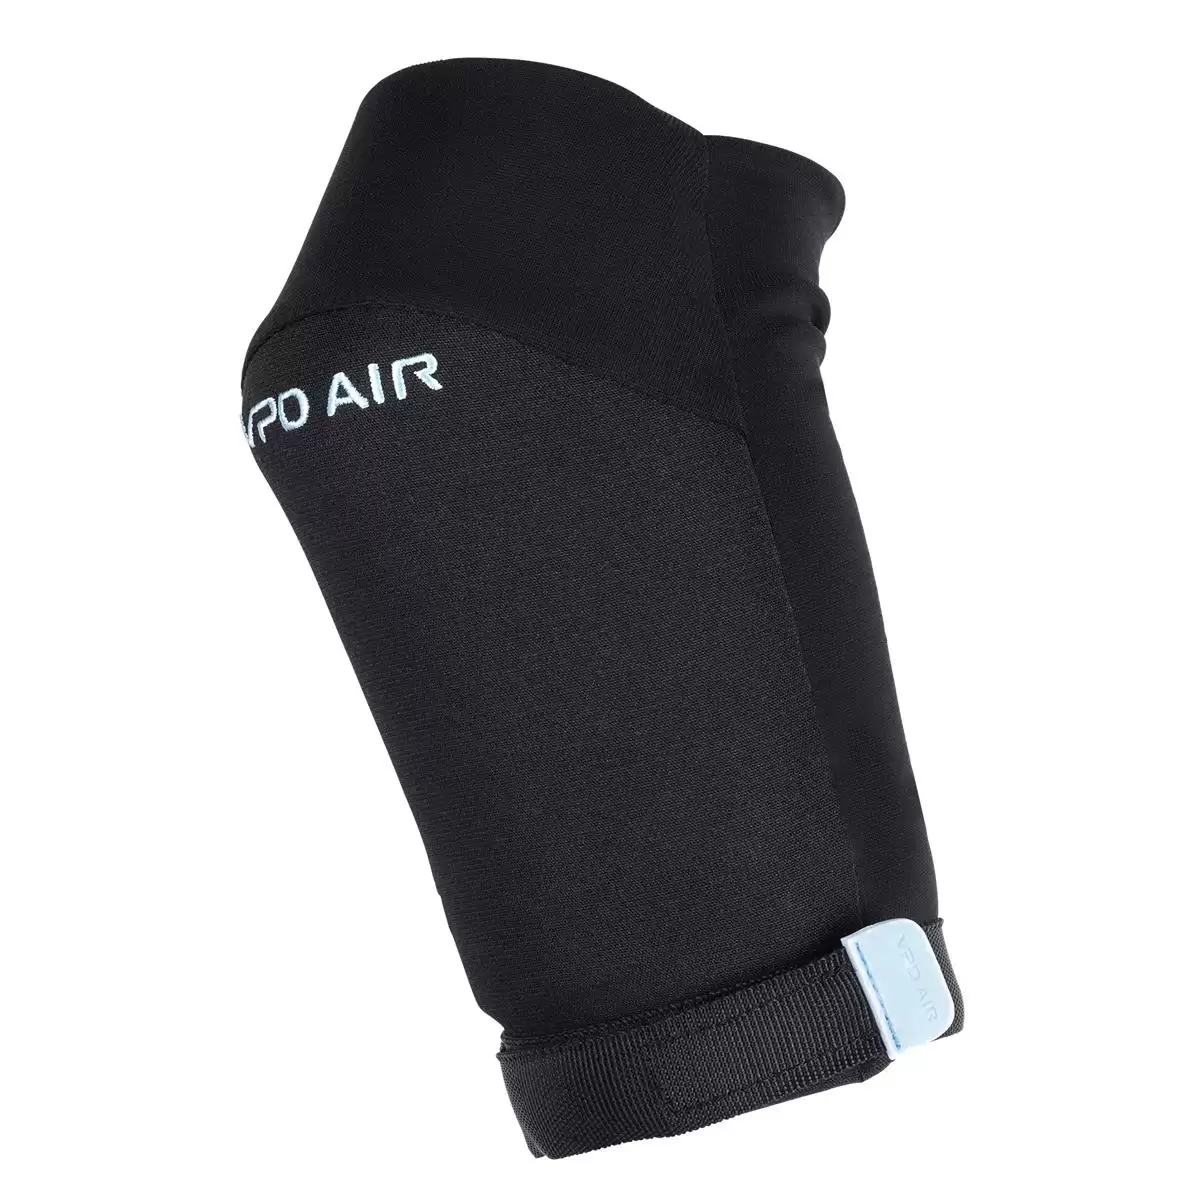 Joint VPD Air Elbow Black Size L #1